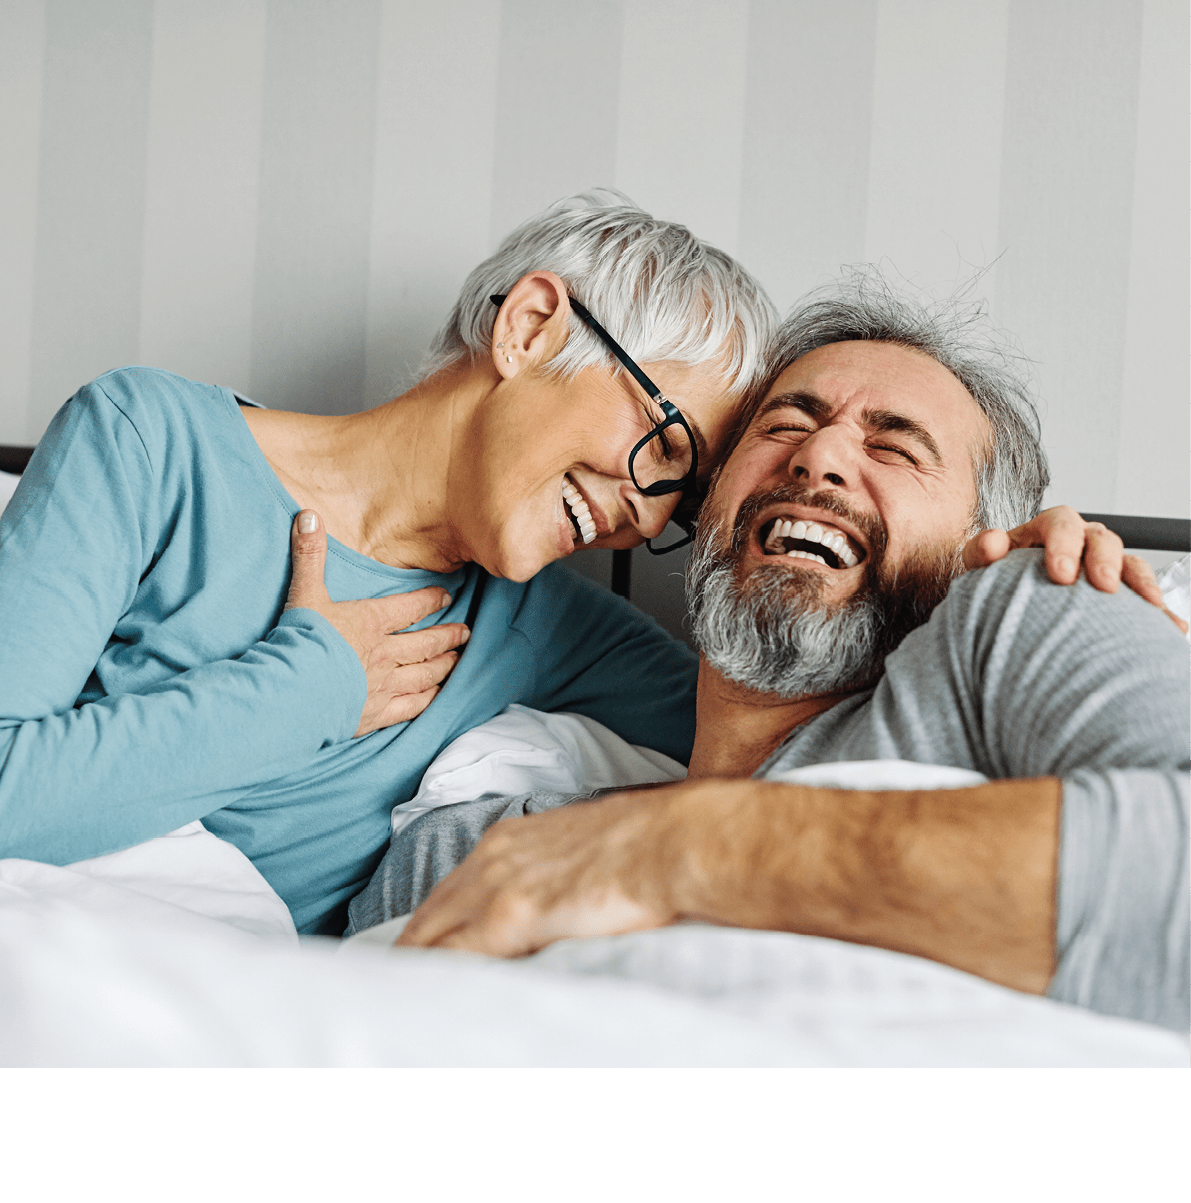 Portrait of a happy senior couple embracing each other on bed, elderly couple at home